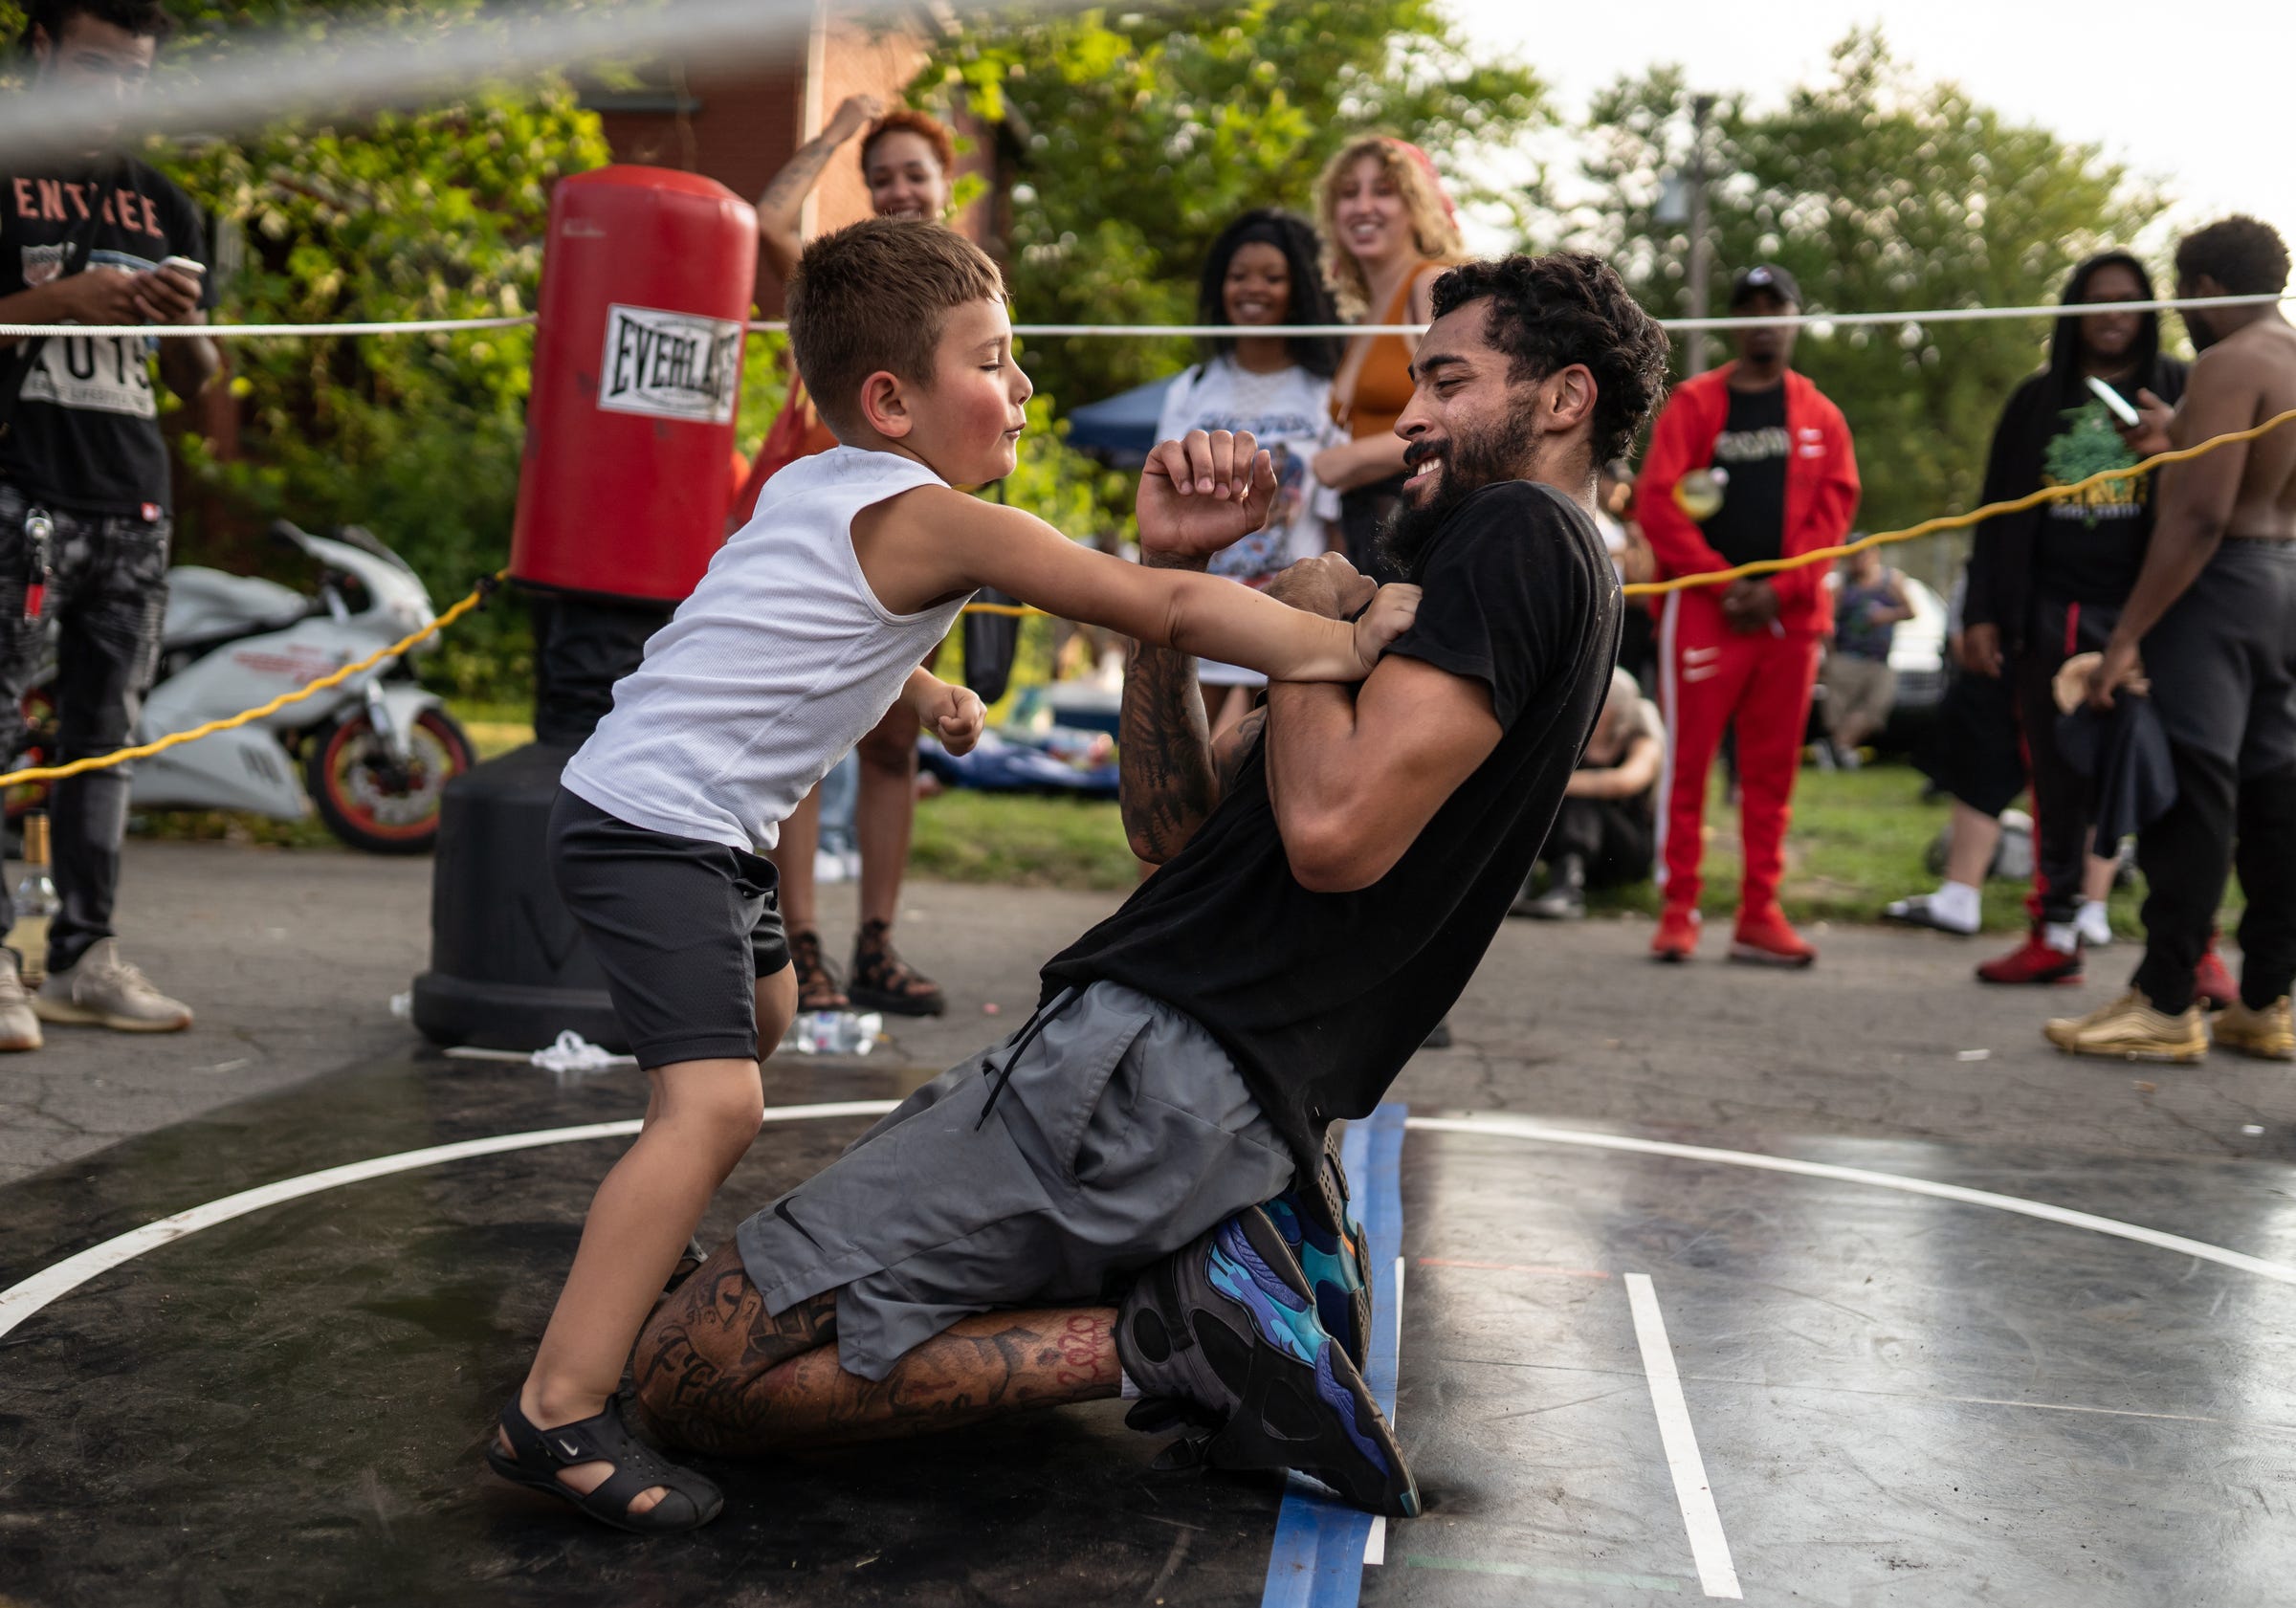 Michael Futrell Jr., who goes by Little Michael, throws a punch at Dwayne Taylor of Lincoln Park as he pretends to fight him between matches during a Pick Your Poison Detroit event put on by Taylor in Detroit's Delray neighborhood on Sunday, June 19, 2021.